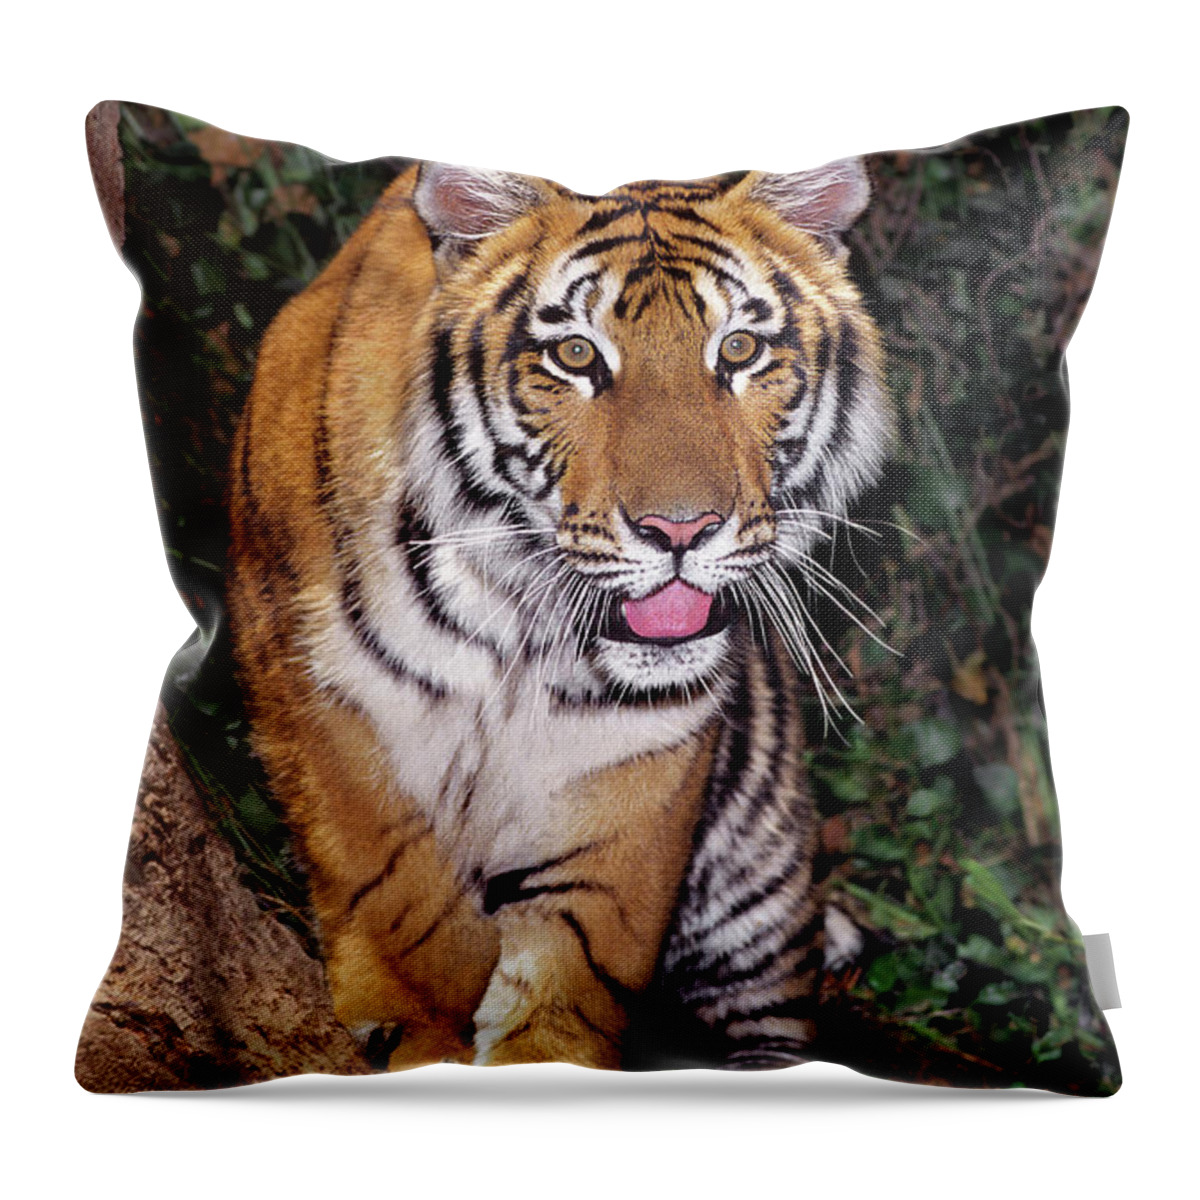 Bengal Tiger Throw Pillow featuring the photograph Bengal Tiger by Tree Endangered Species Wildlife Rescue by Dave Welling